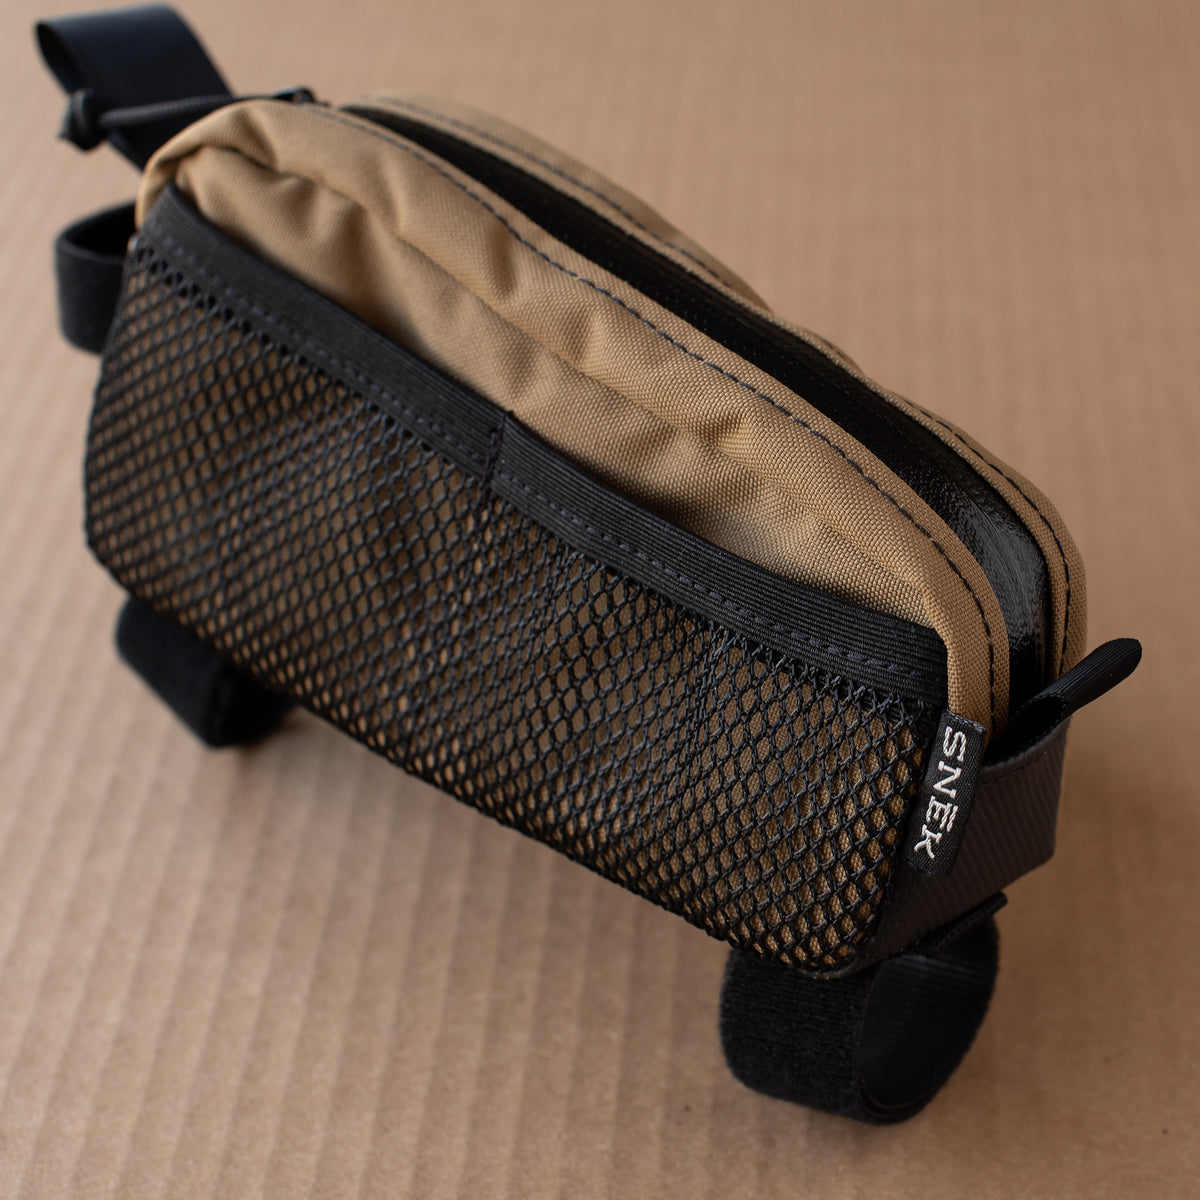 snek cycling top tube bag picture of side external pockets